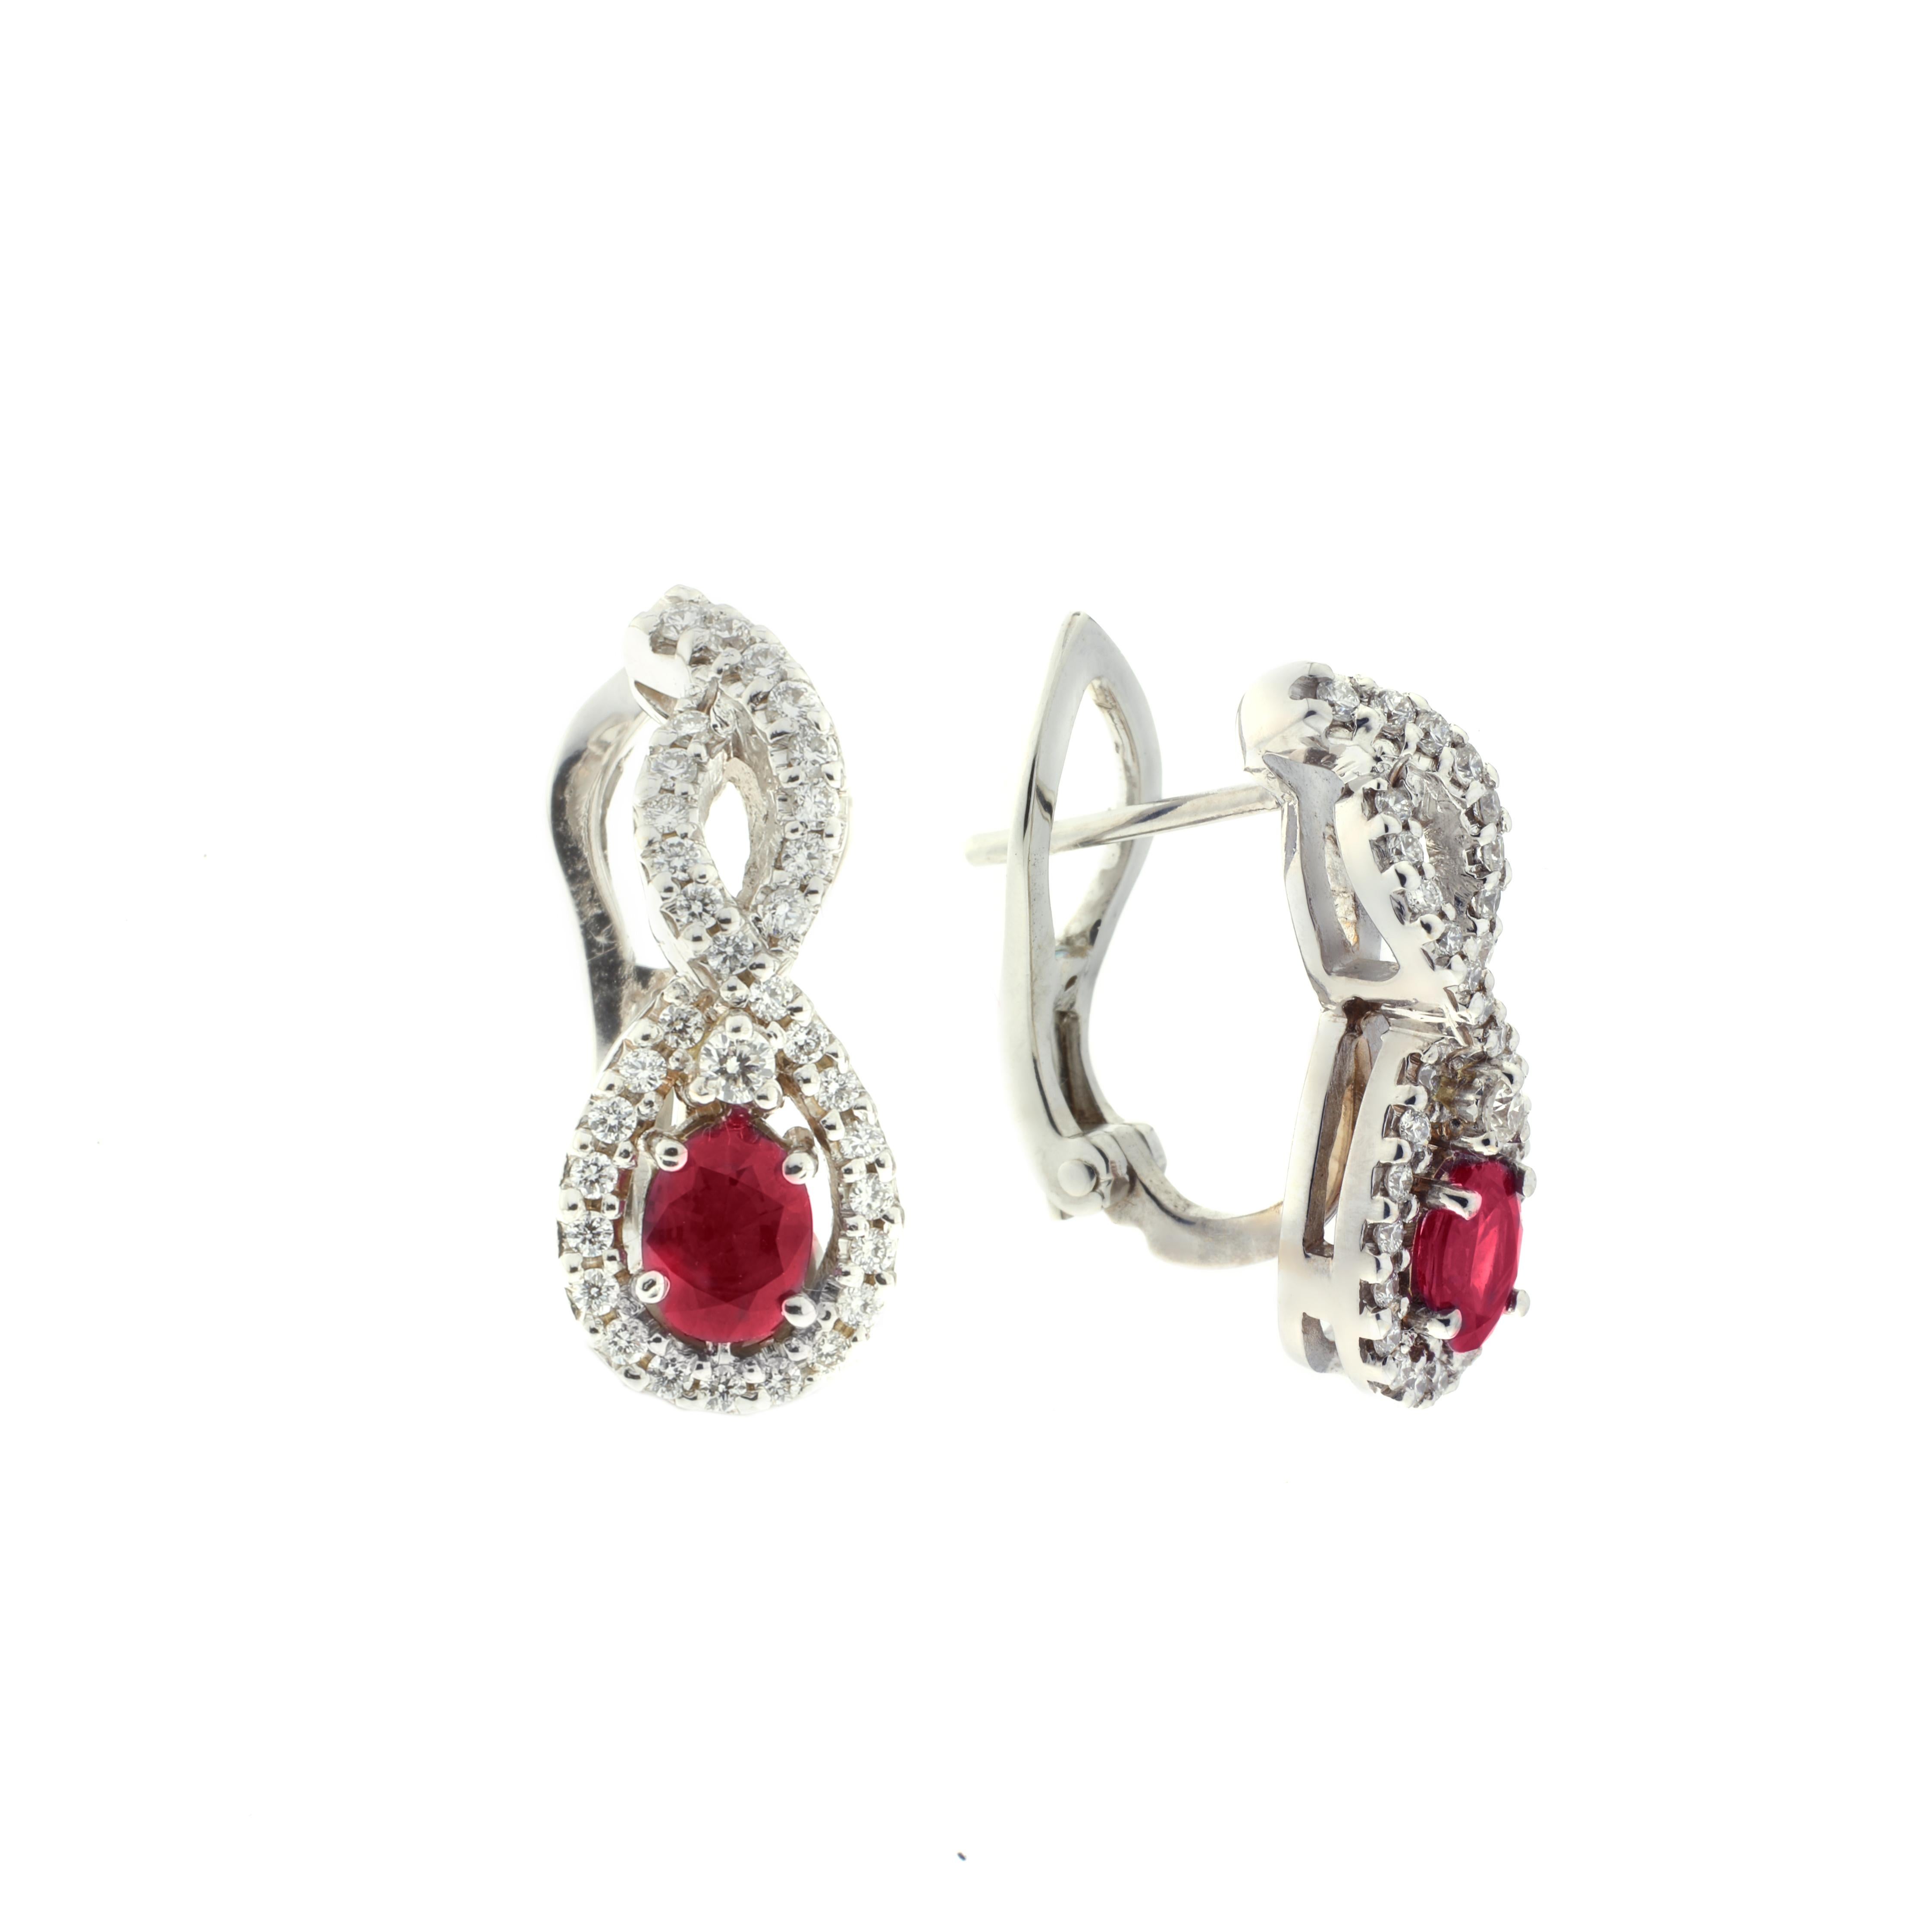 These earrings, masterfully created entirely by hand from 18-karat white gold, are each set with a vibrant ruby set amongst brilliant white diamonds. The stylized figure-of-eight design is evocative of classic symbols of eternity and